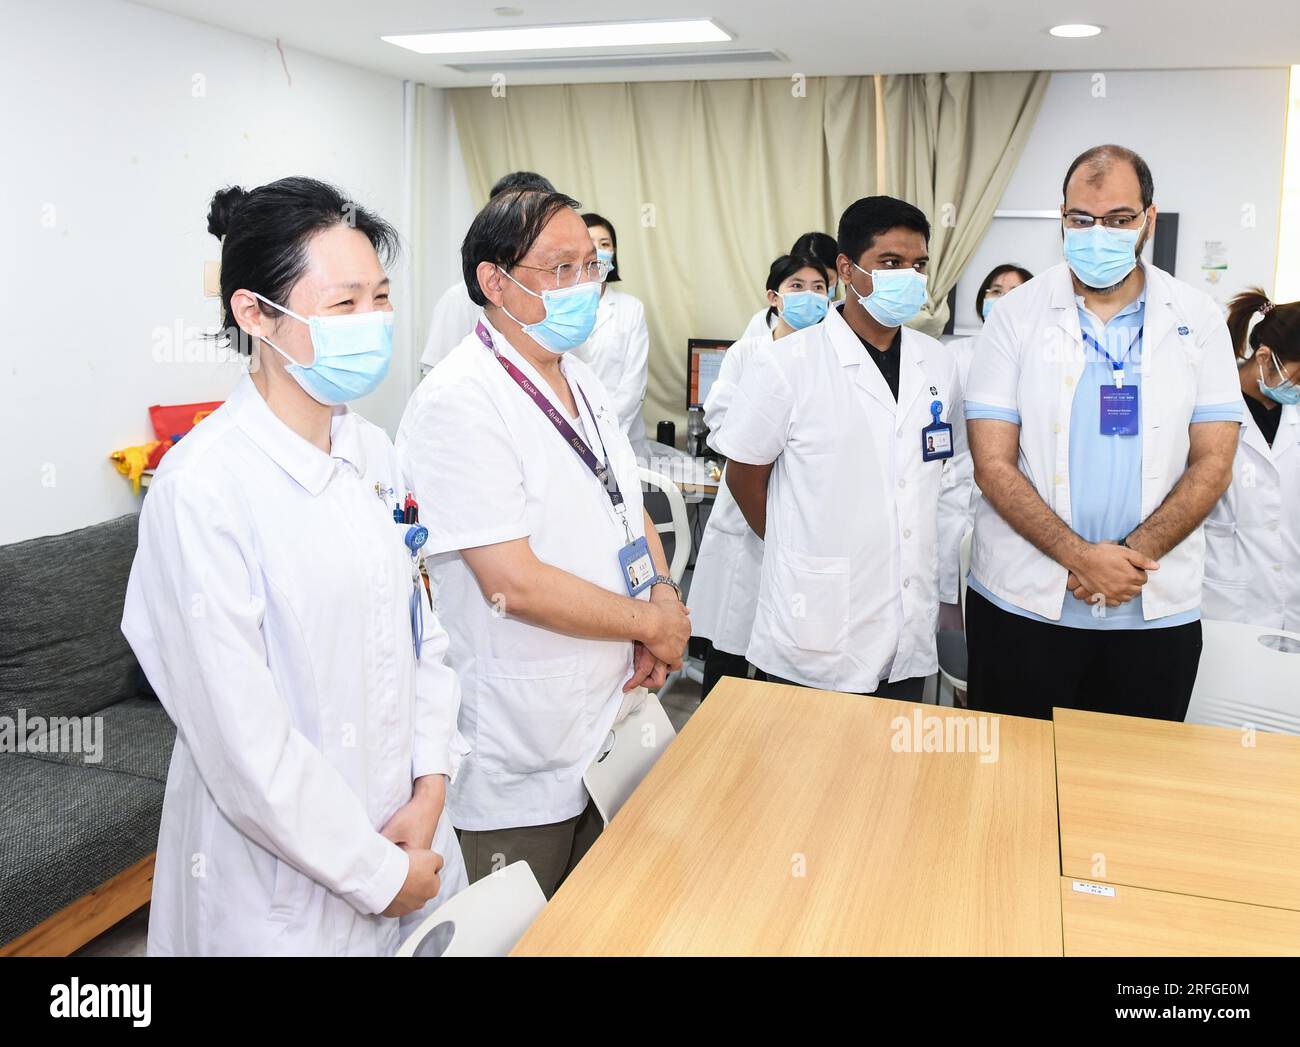 (230803) -- NANJING, Aug. 3, 2023 (Xinhua) -- Fan Zhining (2nd L), expert of digestive endoscopy, attends a morning session with foreign medical workers of a medical seminar at Jiangsu Province Hospital in Nanjing, capital of east China's Jiangsu Province, Aug. 1, 2023. In recent years, Jiangsu Province Hospital cooperated with medical institutions in Pakistan, Egypt and other countries and regions in the field of digestive endoscopy to promote medical cooperation under the Belt and Road Initiative. (Xinhua/Ji Chunpeng) Stock Photo